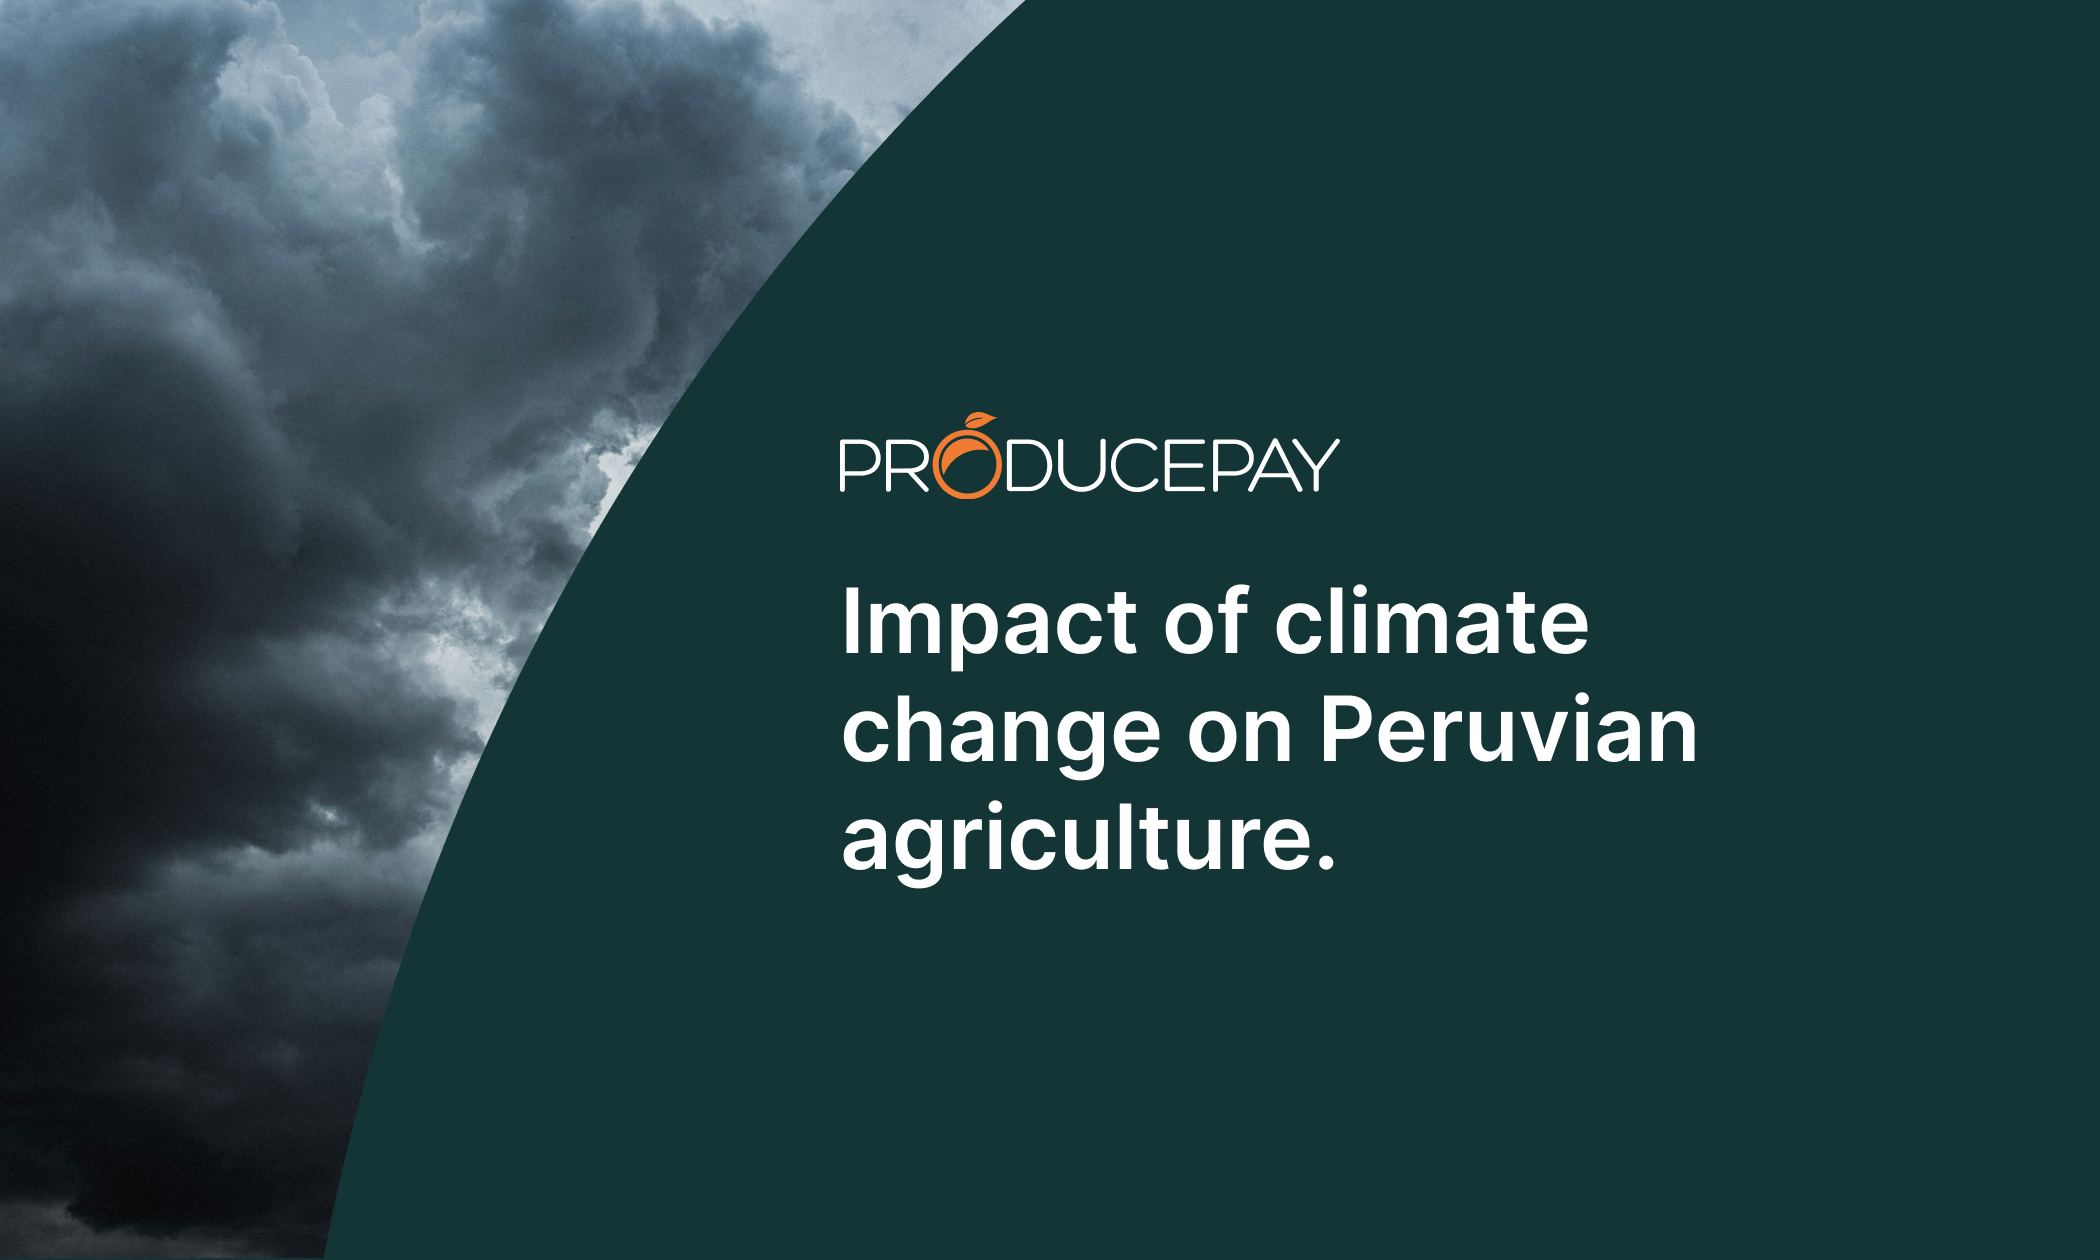 Impact of climate change on Peruvian agriculture